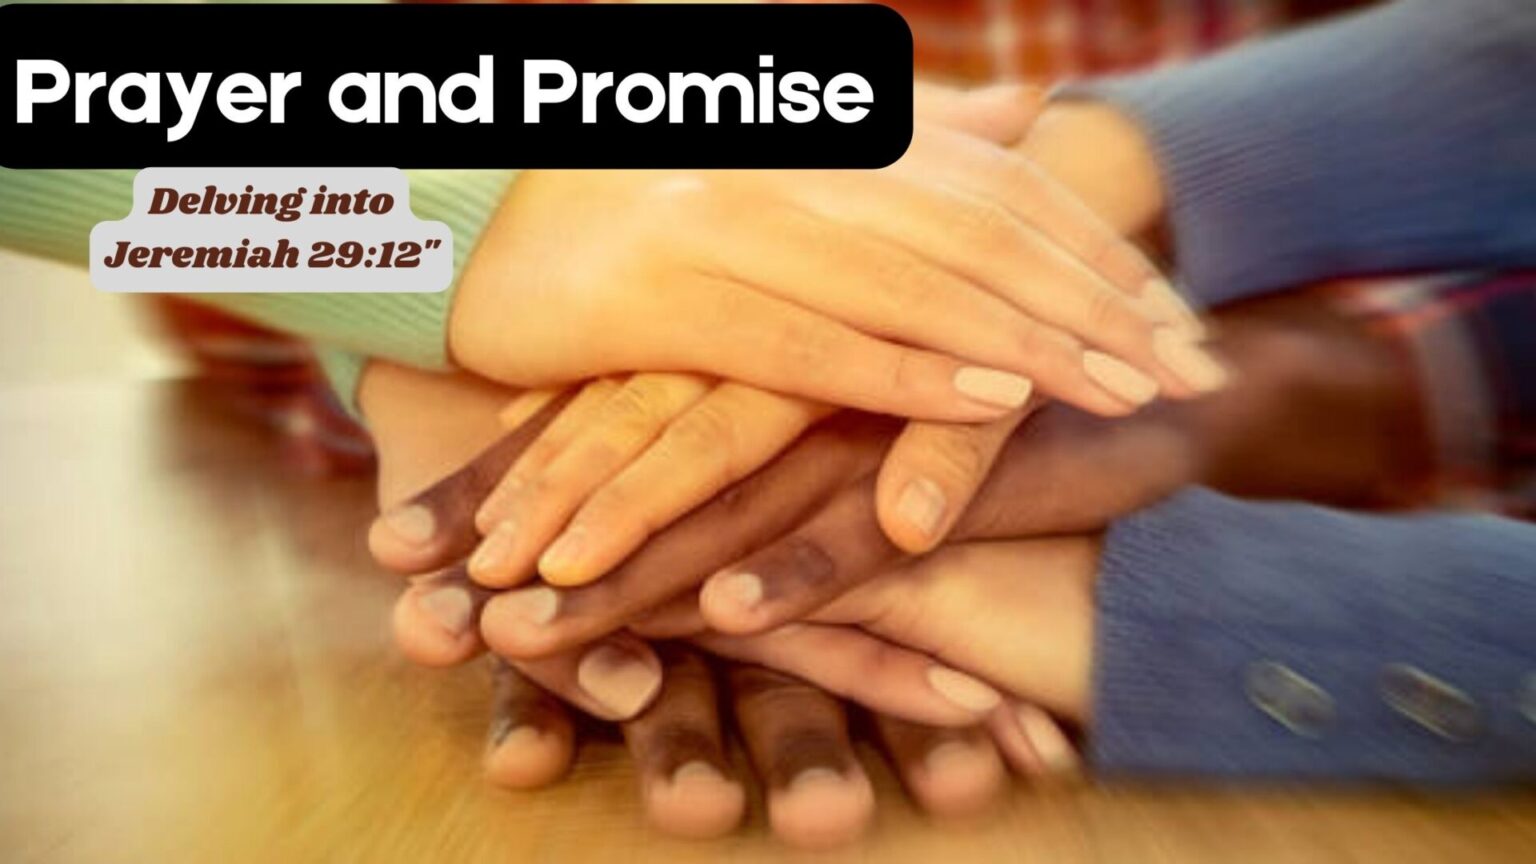 "Prayer and Promise: Delving into Jeremiah 29:12"